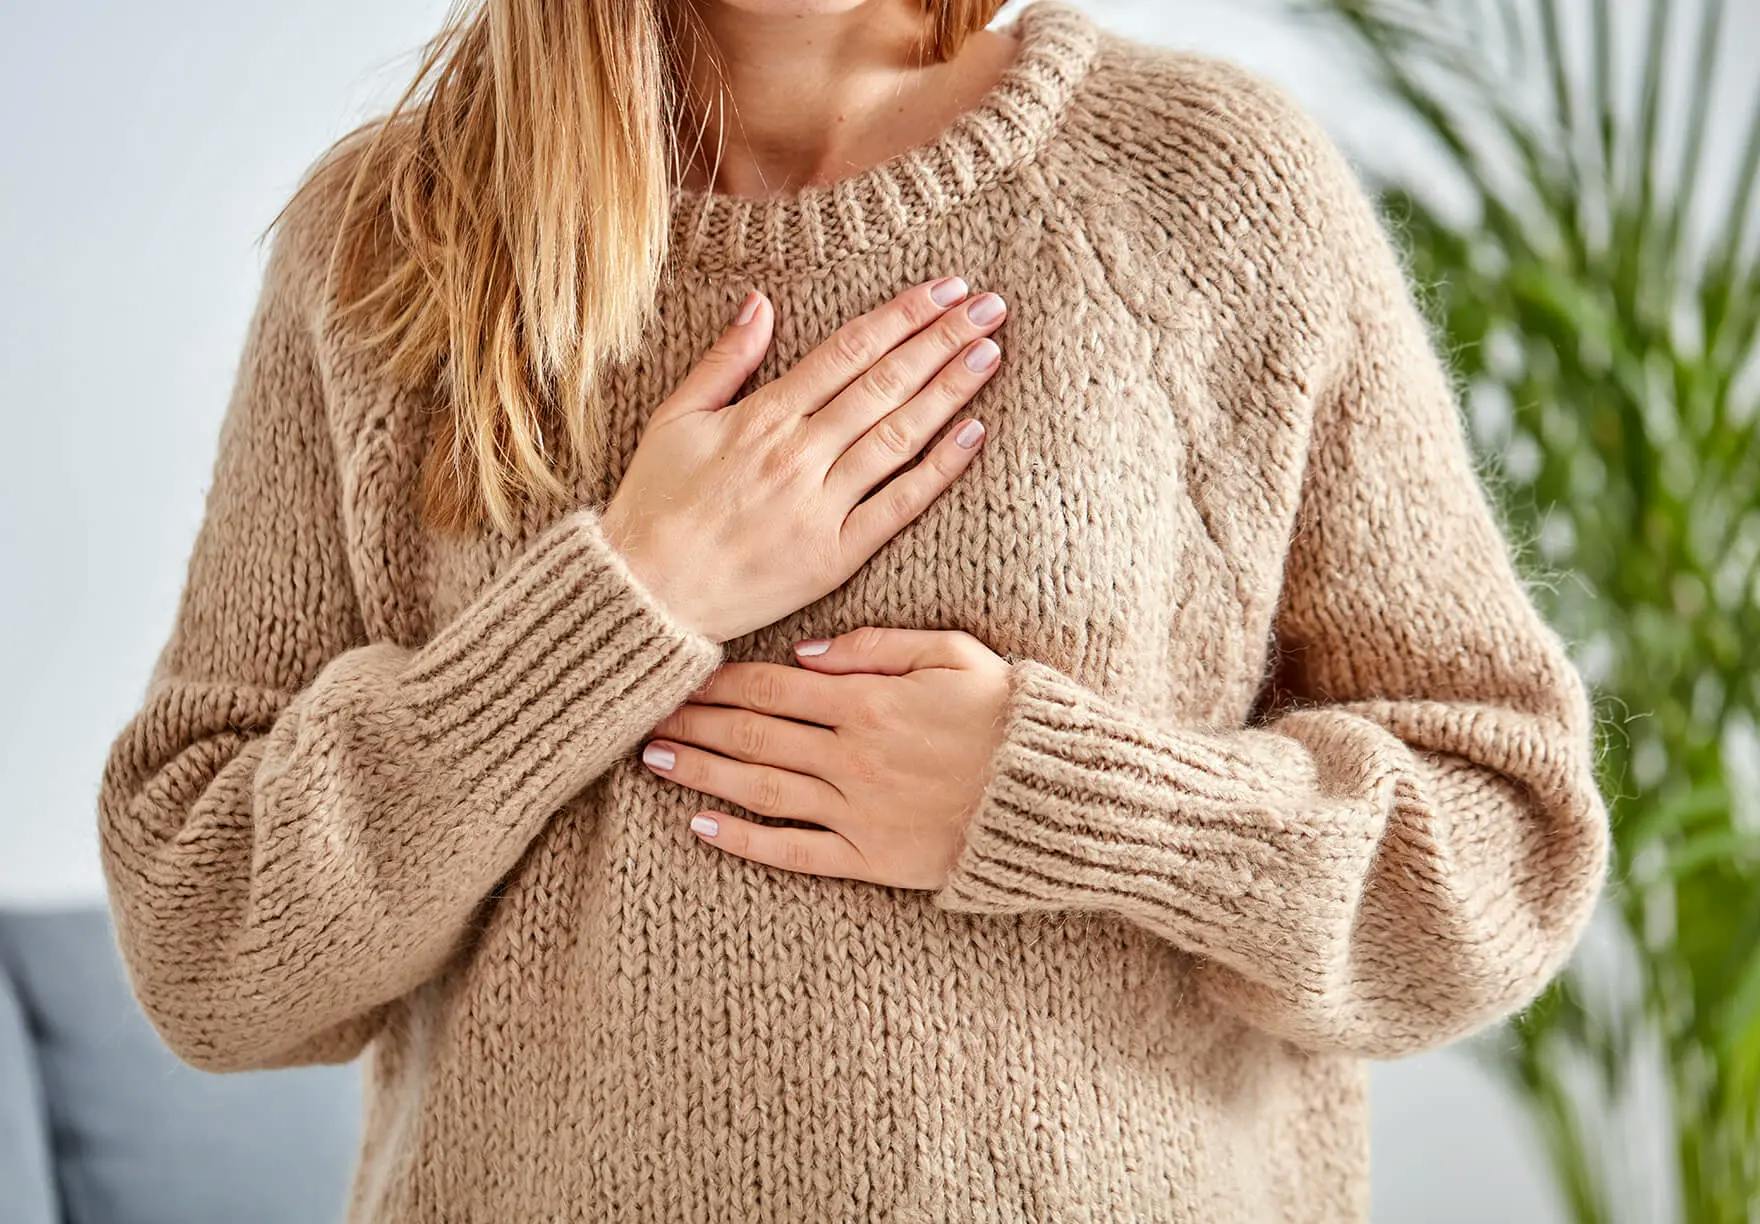 A woman is holding her stomach in a sweater.